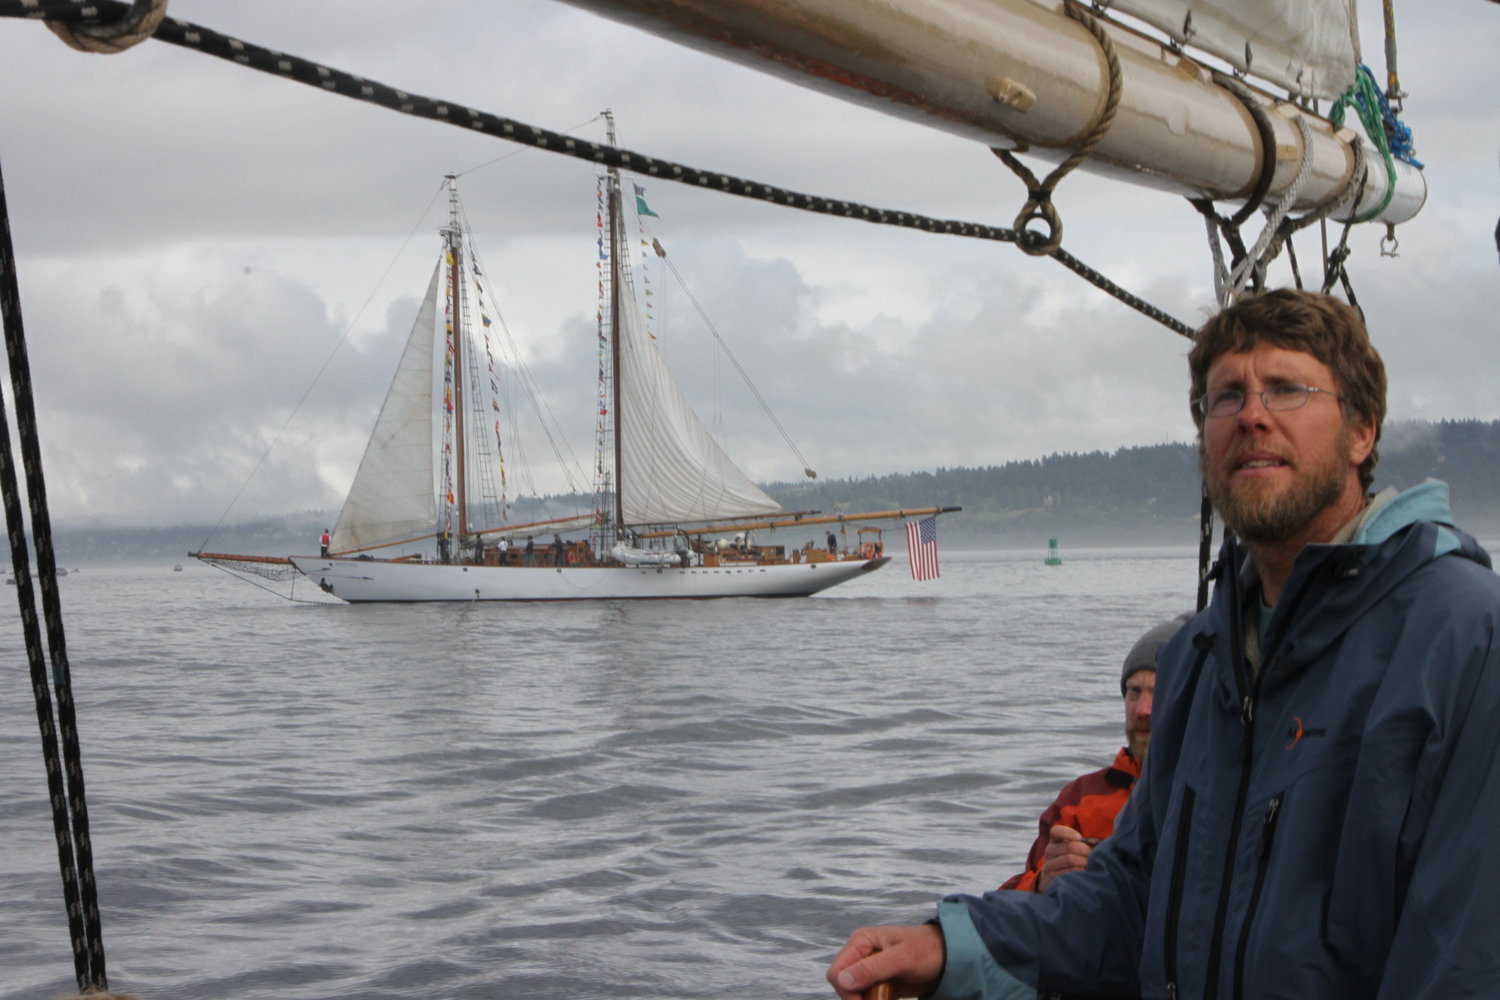 Aaron Wenholz, of Poulsbo, captains the 72-foot schooner Red Jacket as the much-larger 133-foot Adventuress comes about astern.